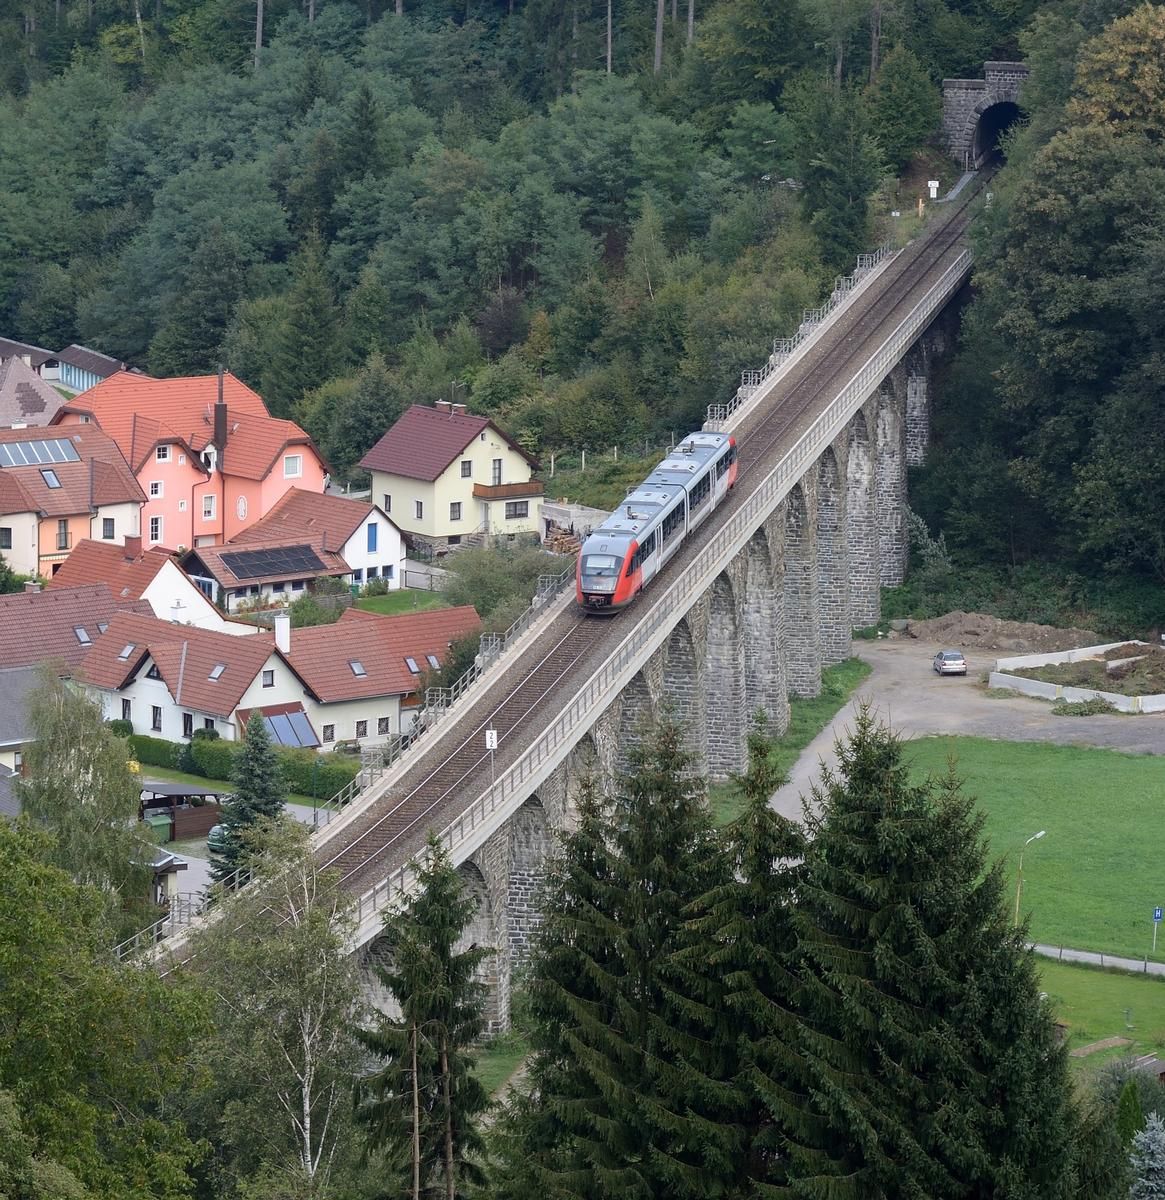 Media File No. 222925 Mur Valley viaduct at Aspang-Markt in Austria of the Wechselbahn. The viaduct is located between the Samberg tunnel (shown) and the Gerichtsberg tunnel (not shown).